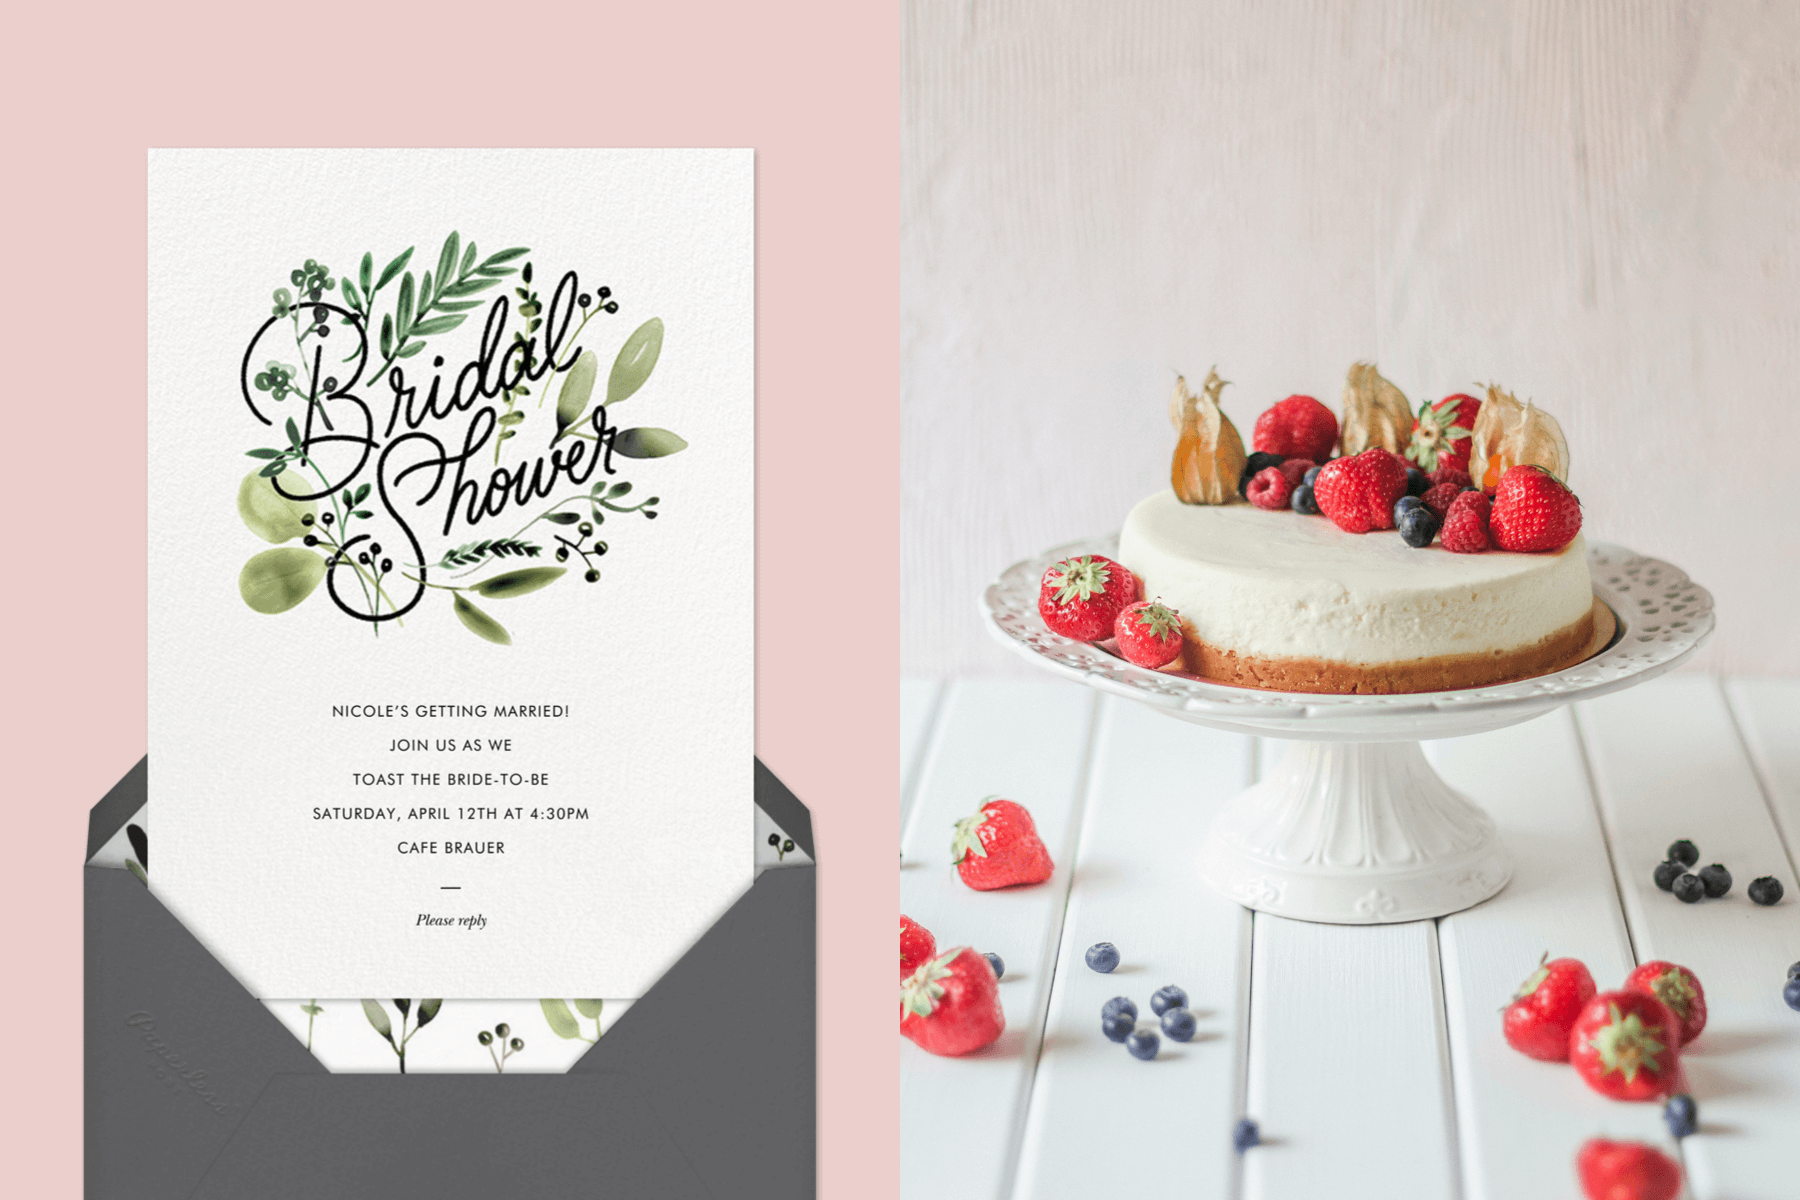 A white bridal shower invitation with illustrated green leaves. Right: A small cake with berries on a cake stand.